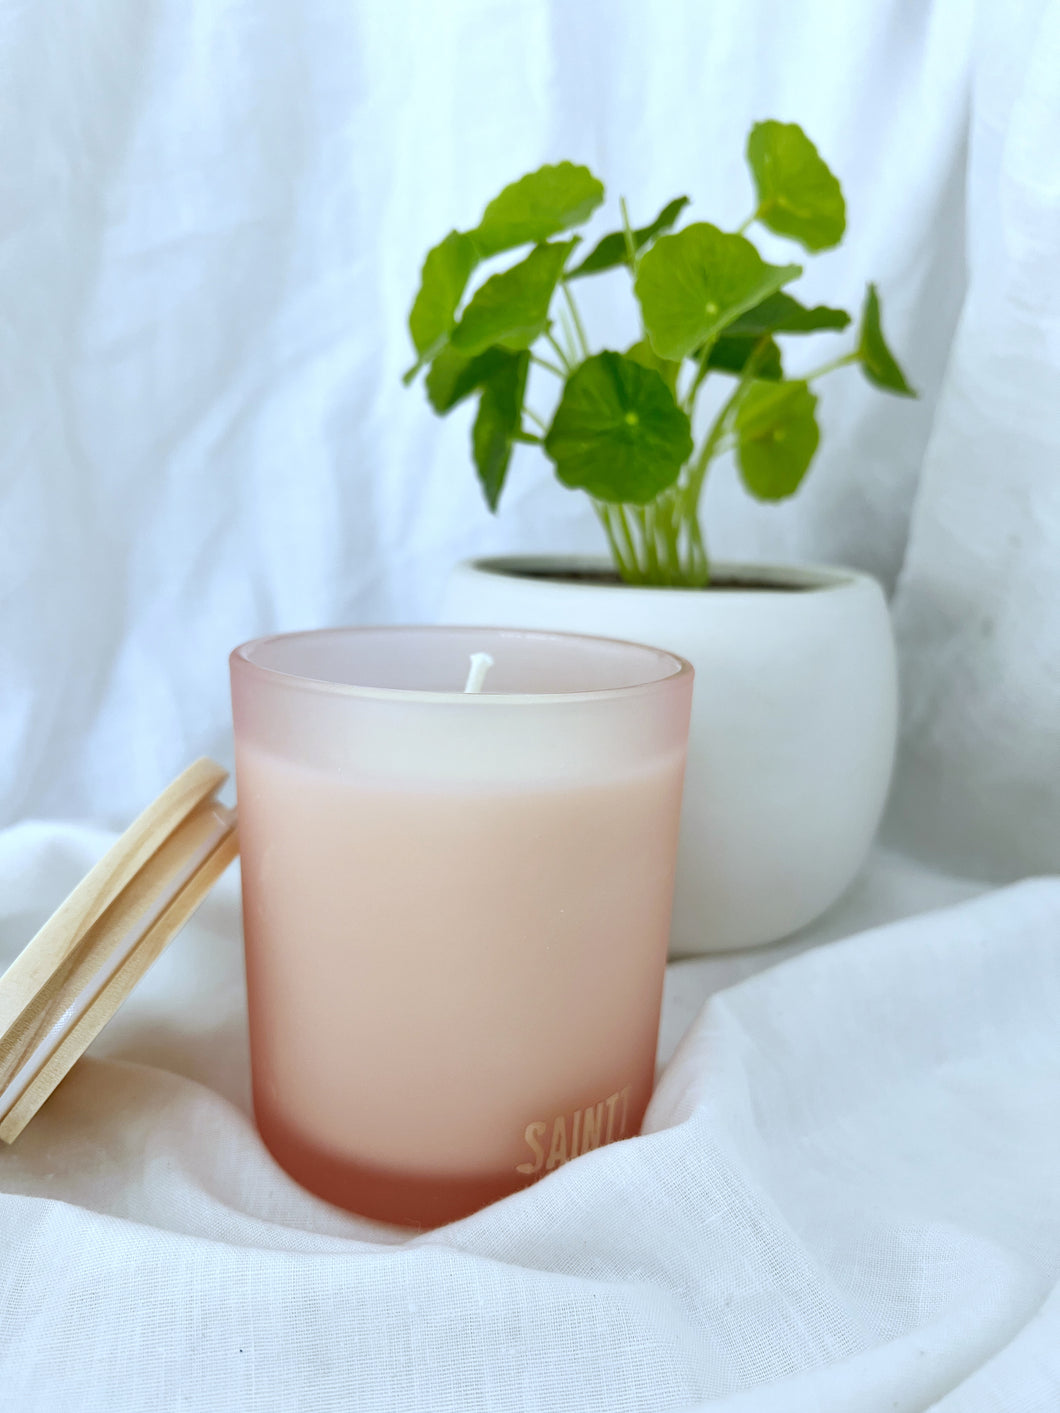 Sienna frosted large glass candle.